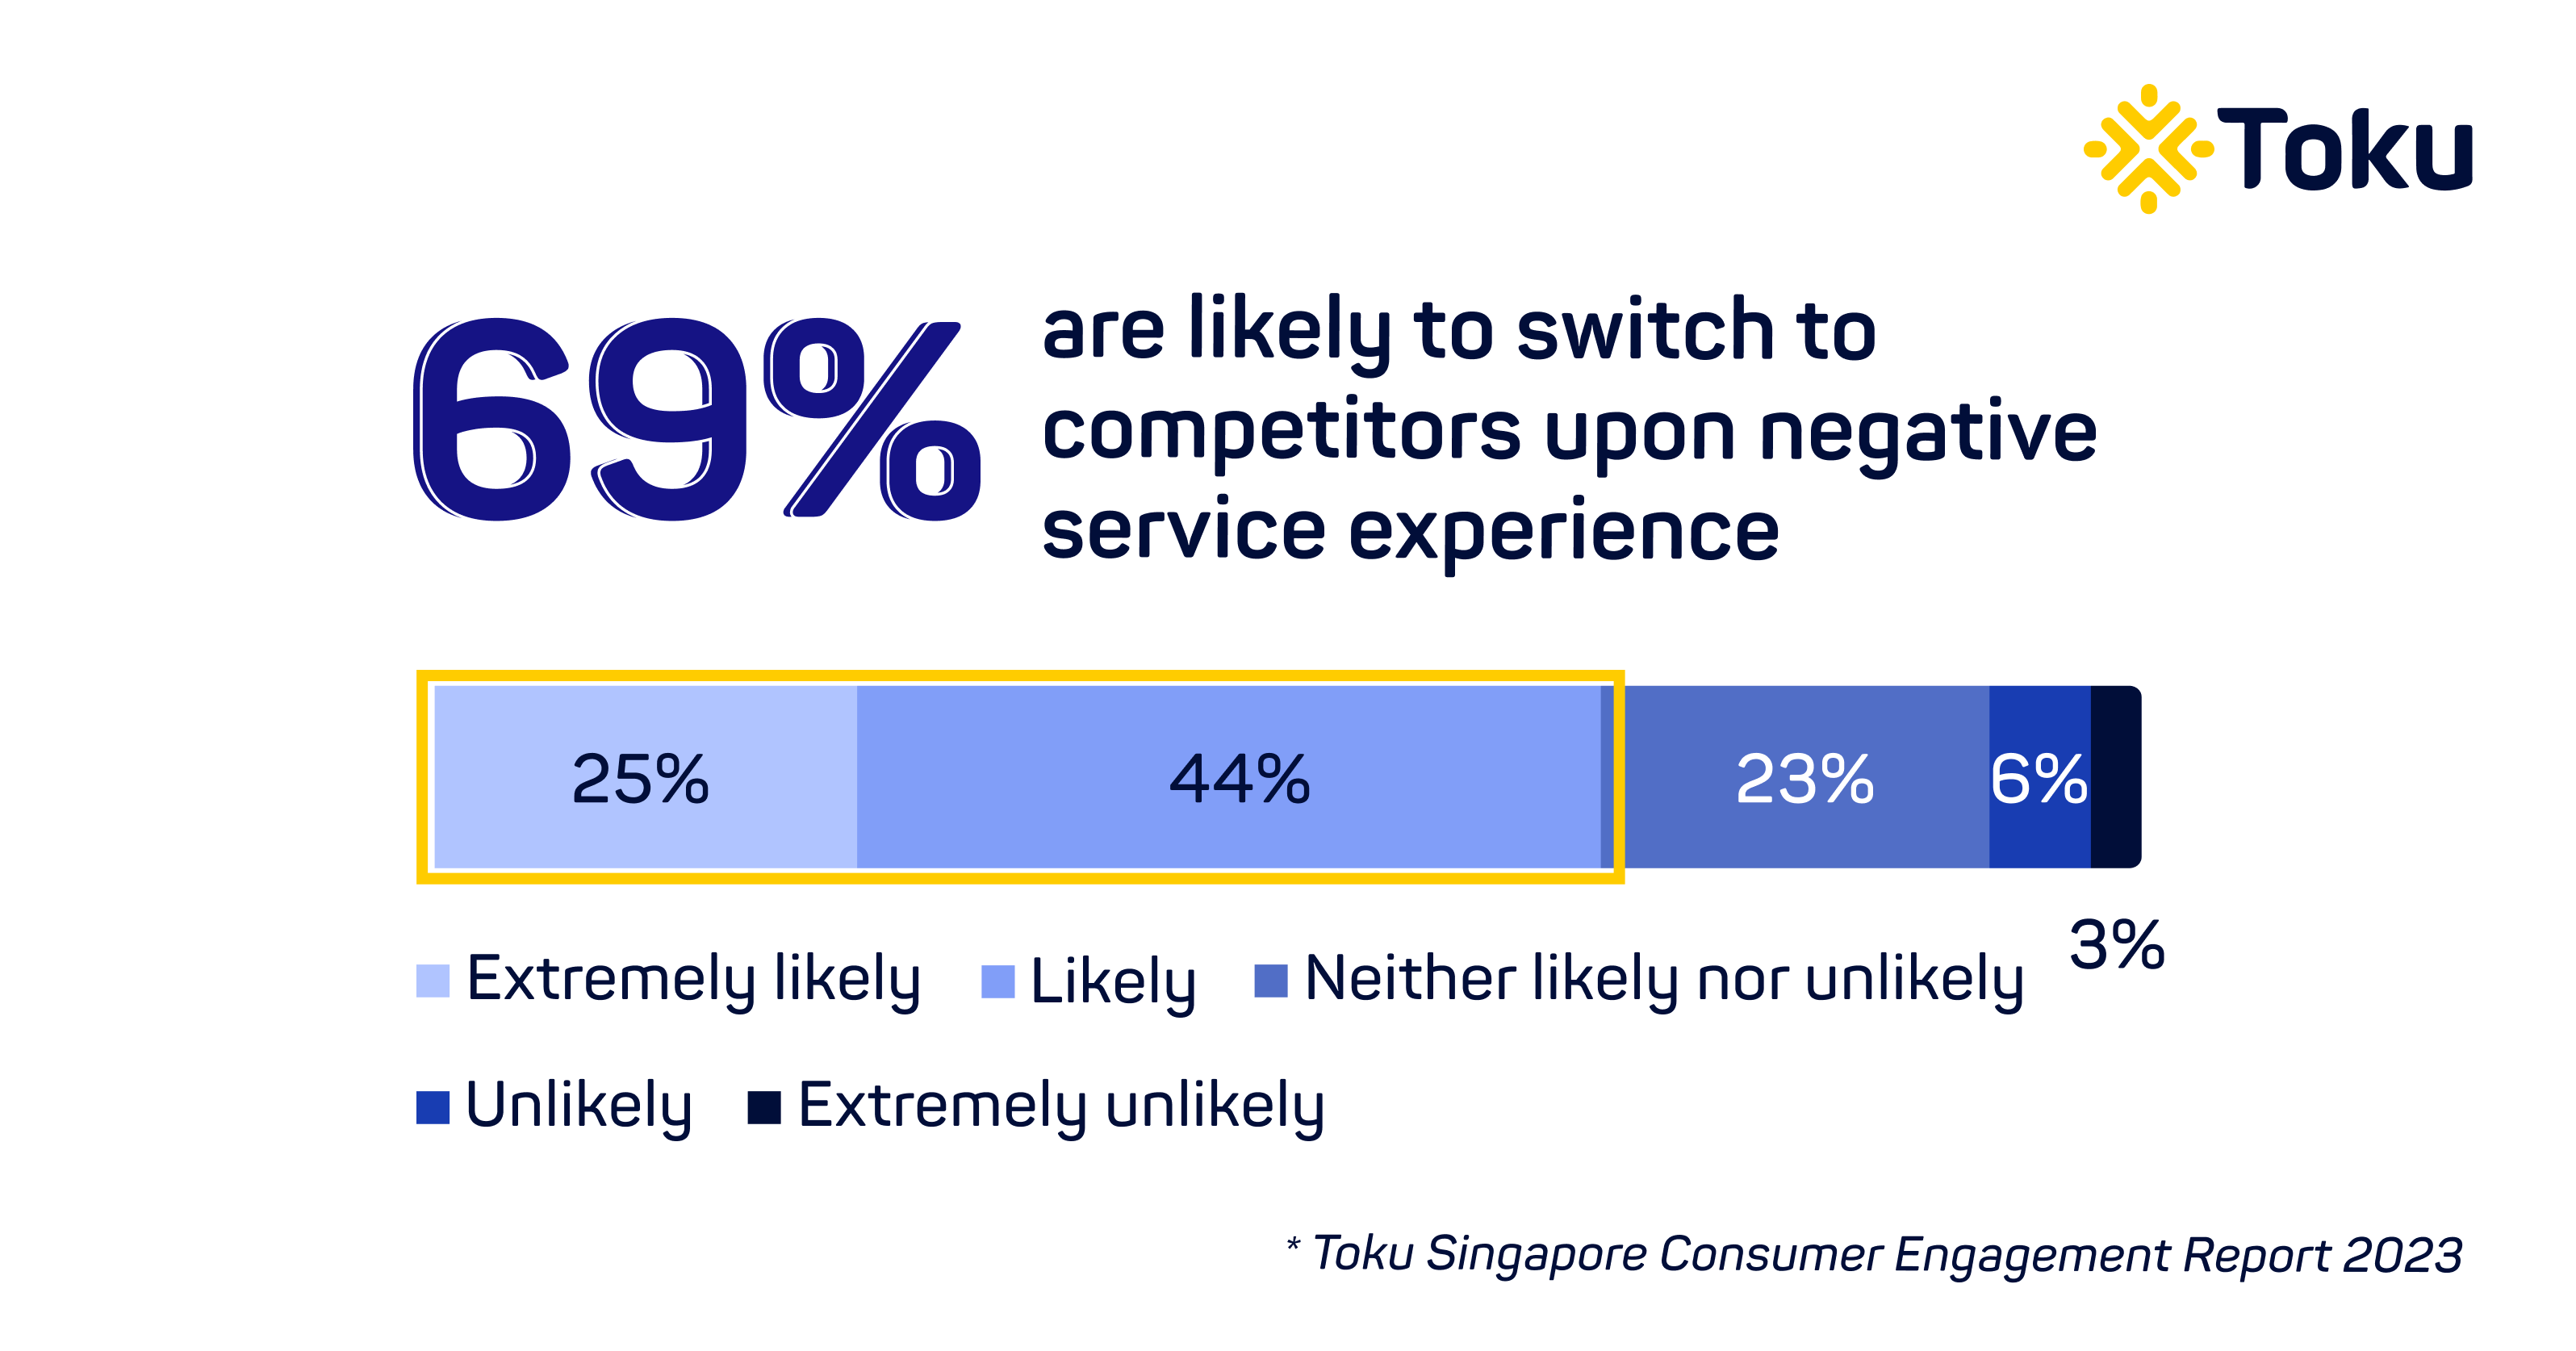 69 percent switch competitors upon negative service experience